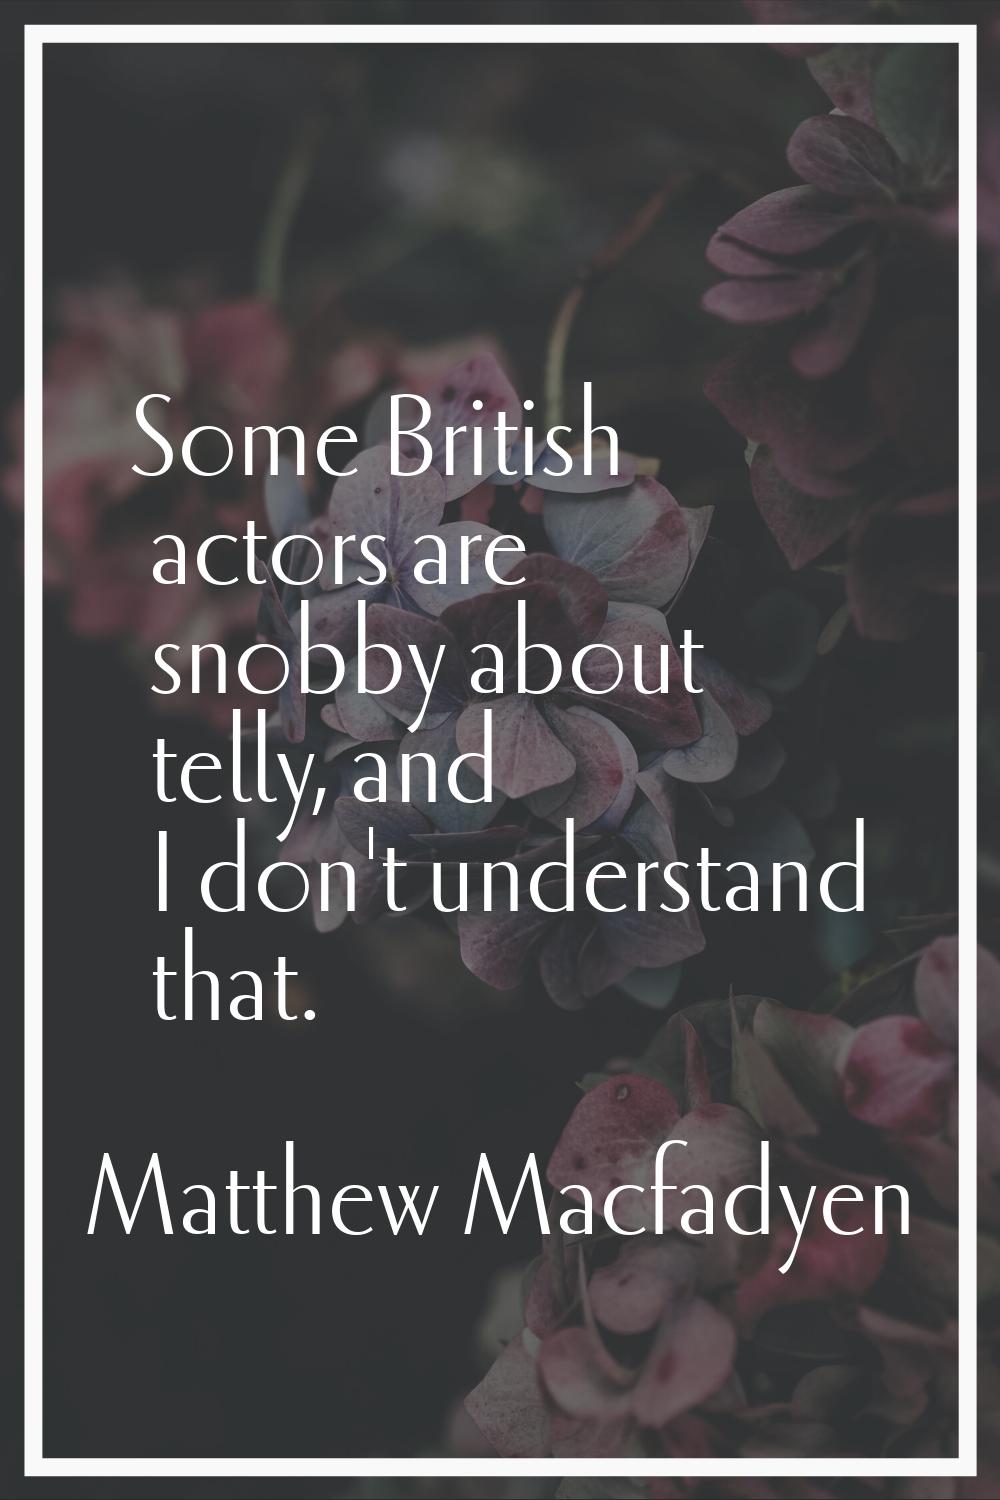 Some British actors are snobby about telly, and I don't understand that.